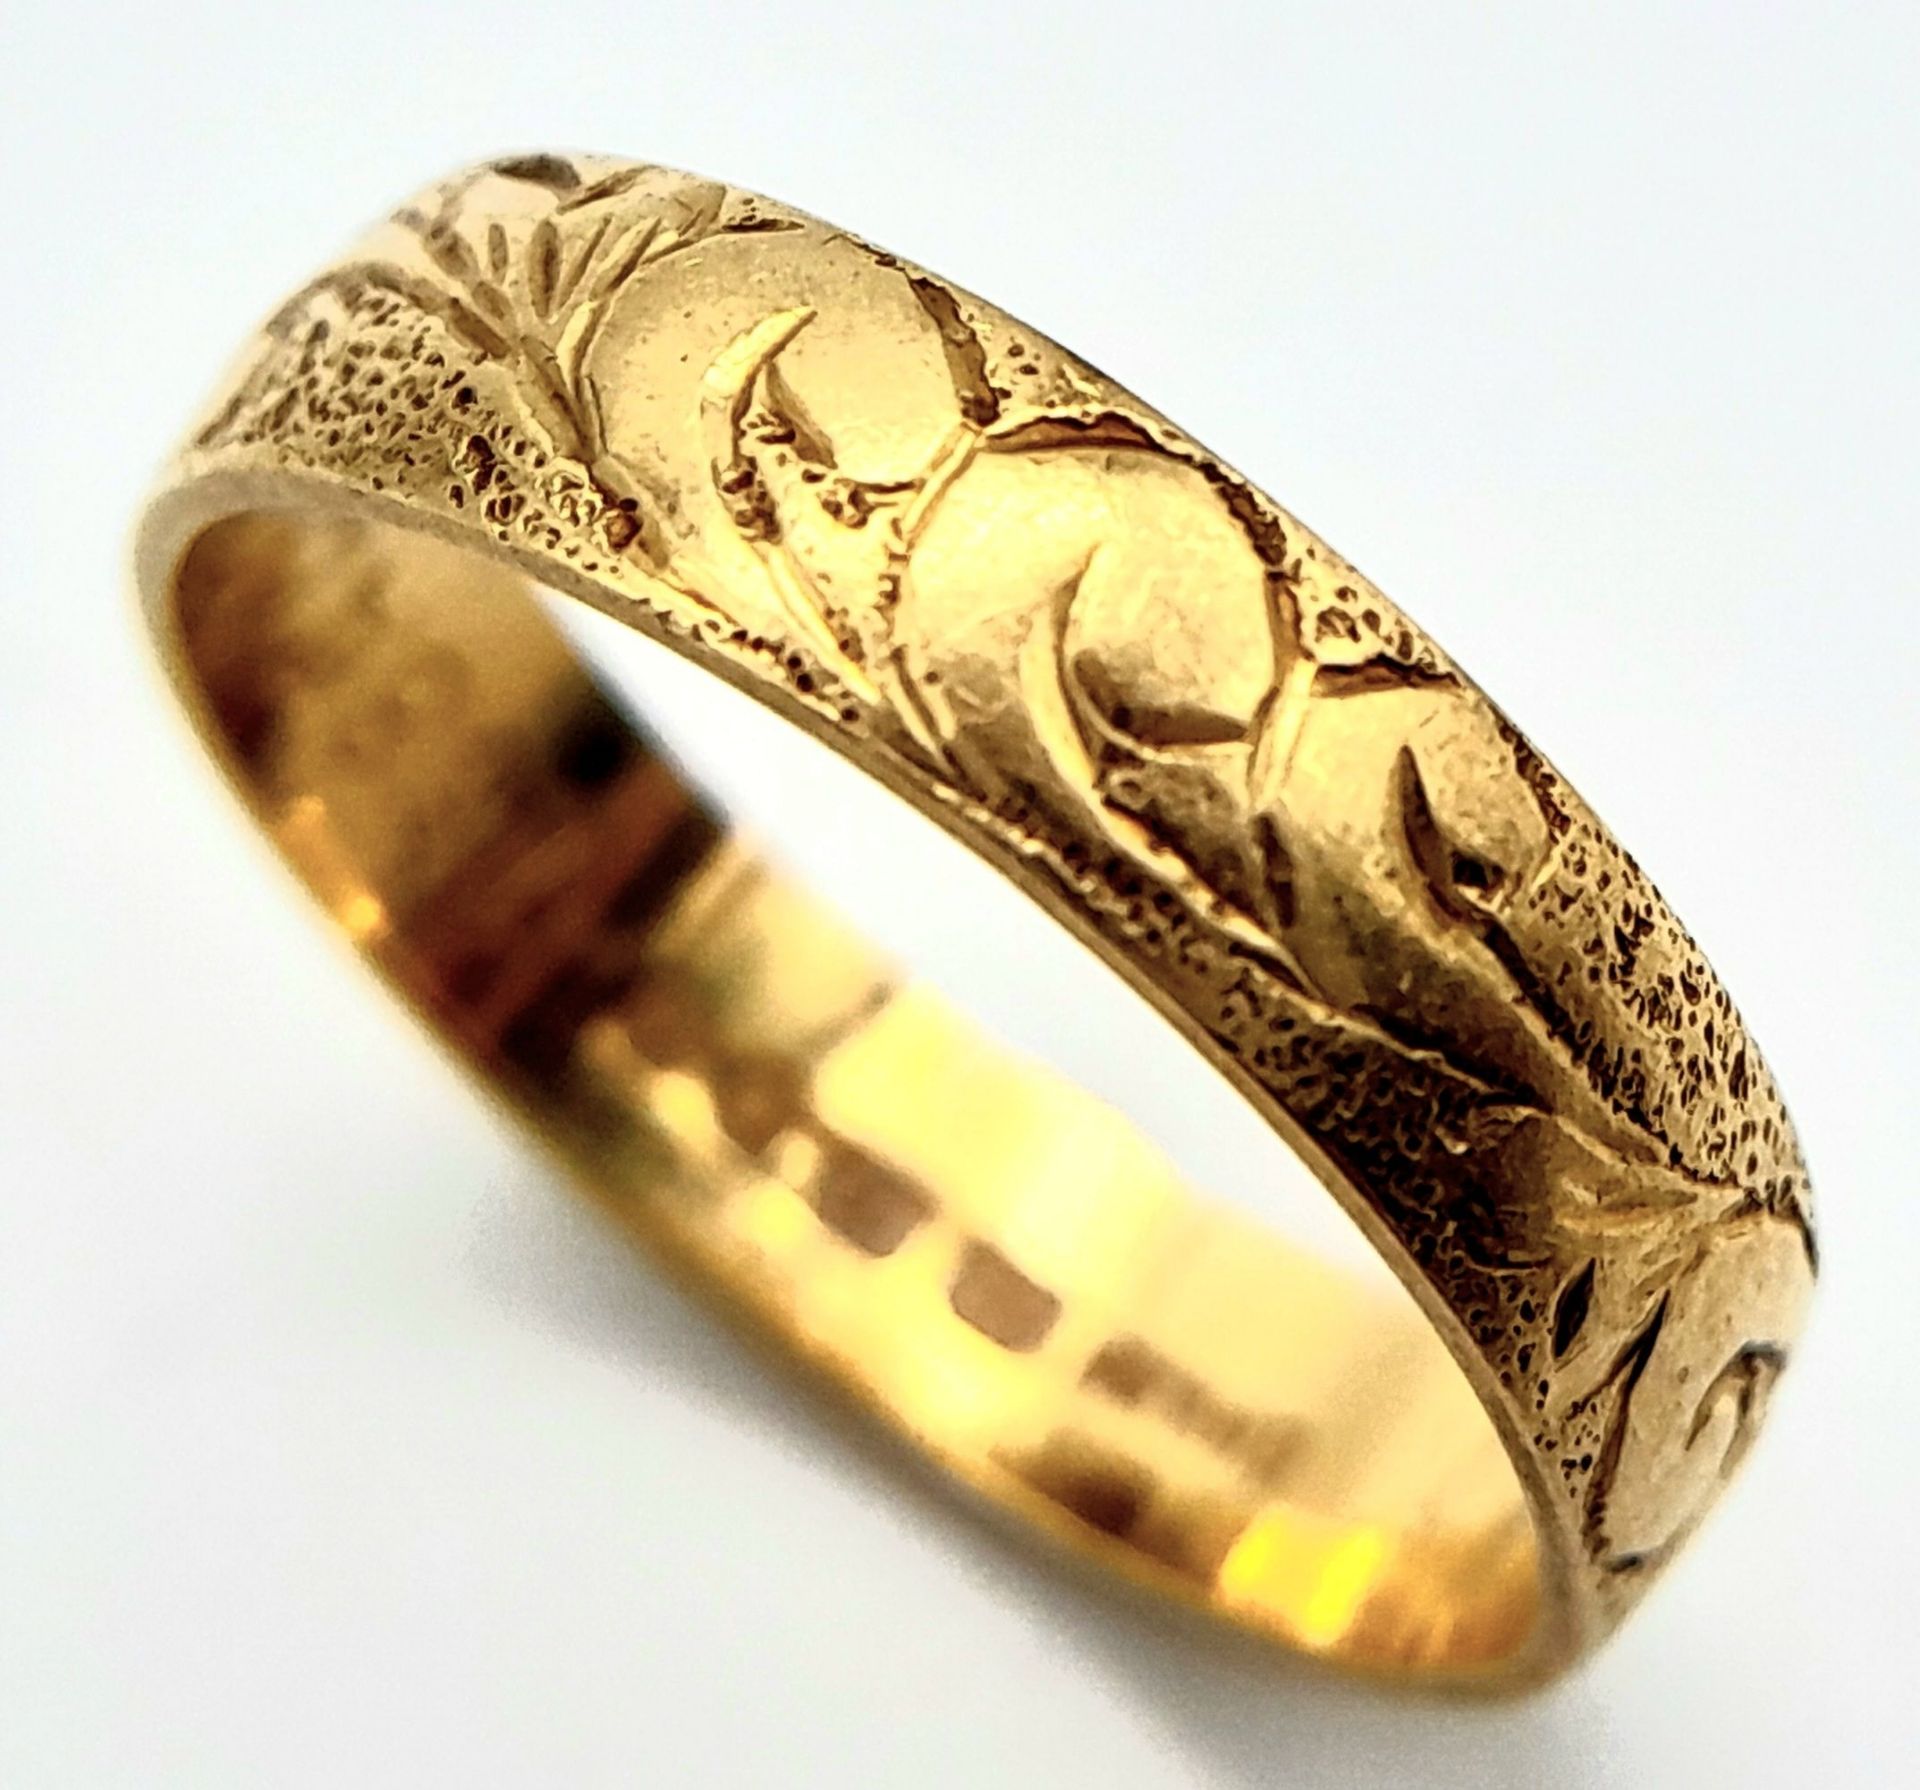 An 18 K yellow gold band ring with an engraved surface. Size: L, weight: 2.5 g.